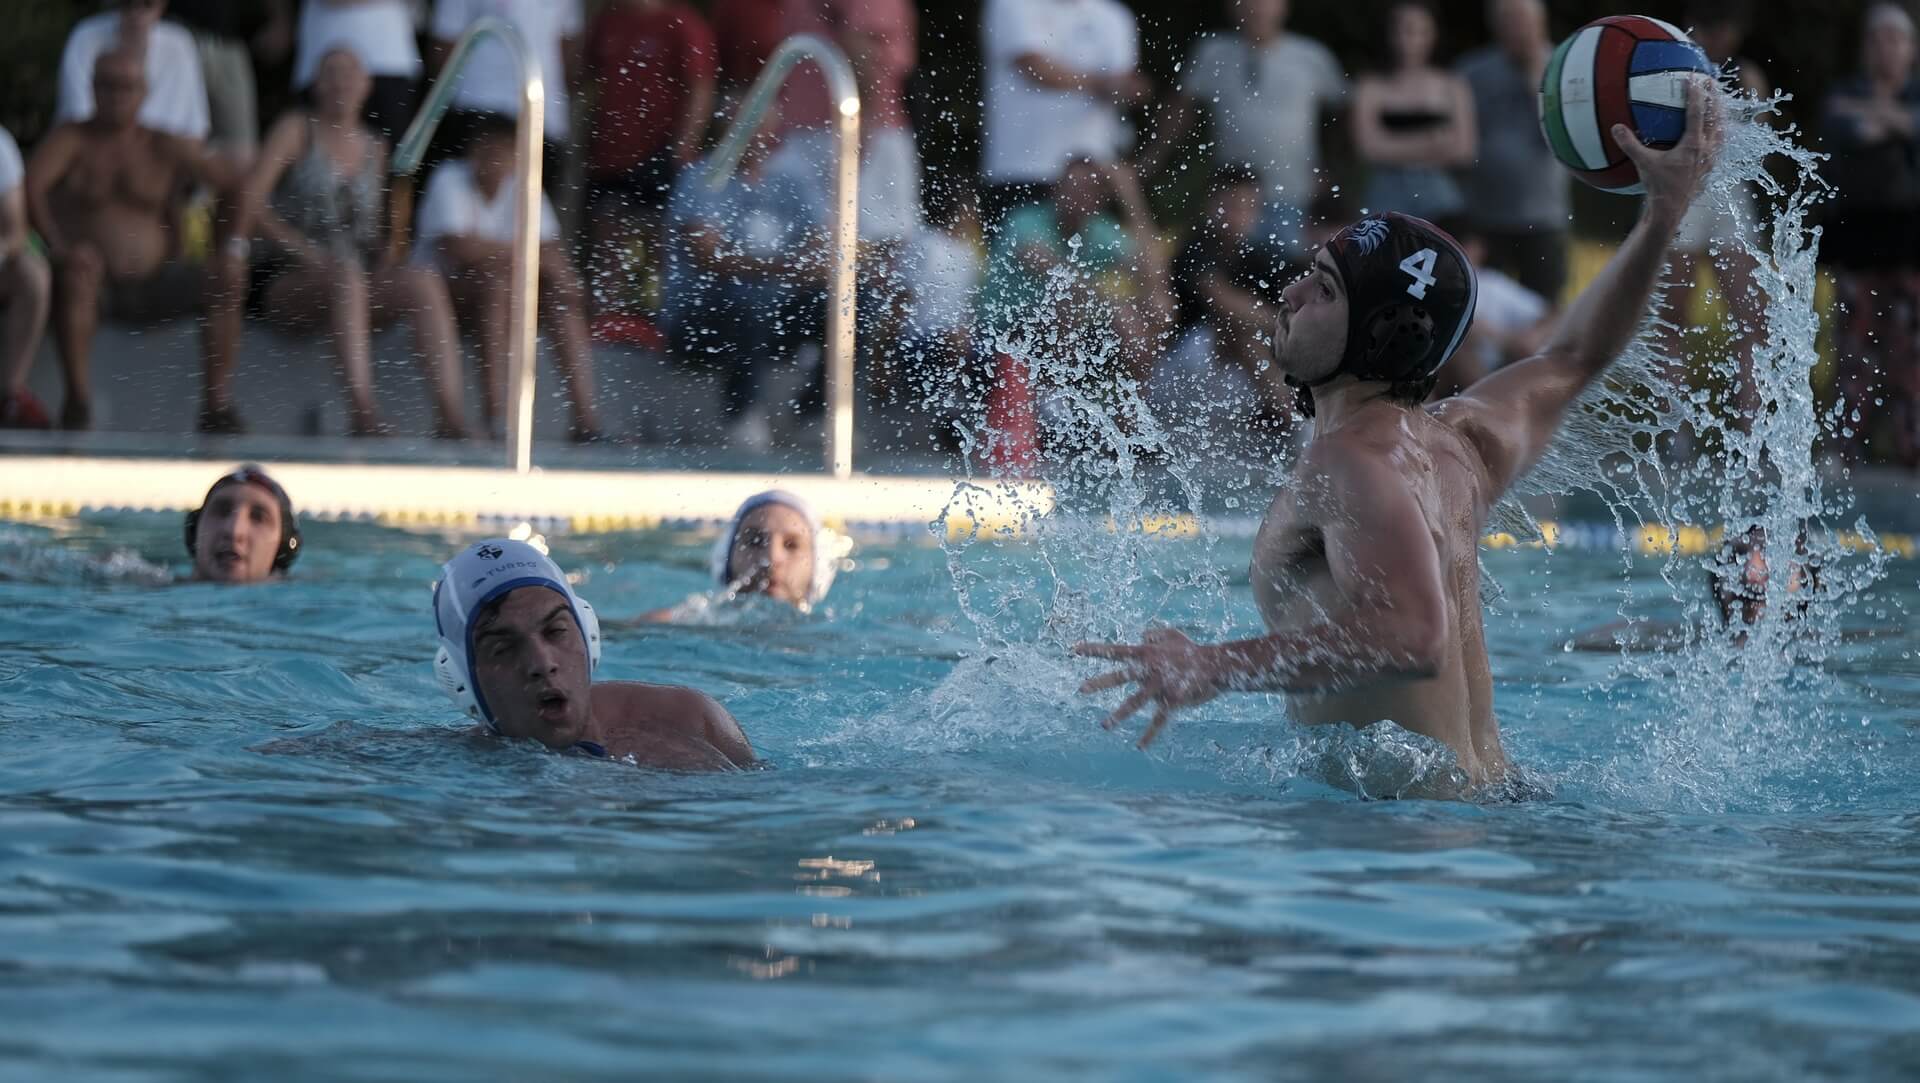 Water polo players and ball